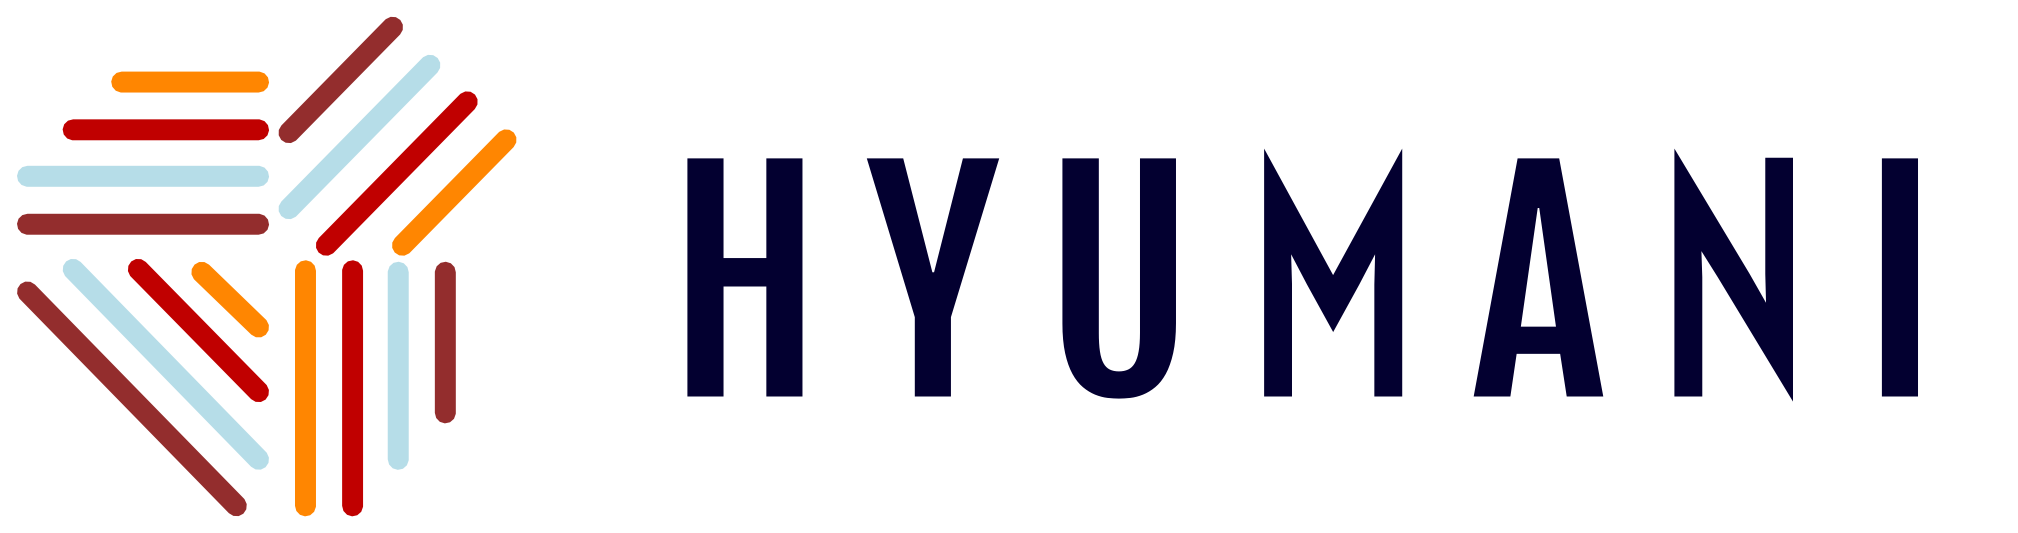 hyumani.com - solution to boost productive efficiency, self efficiency, and spontaneous creativity